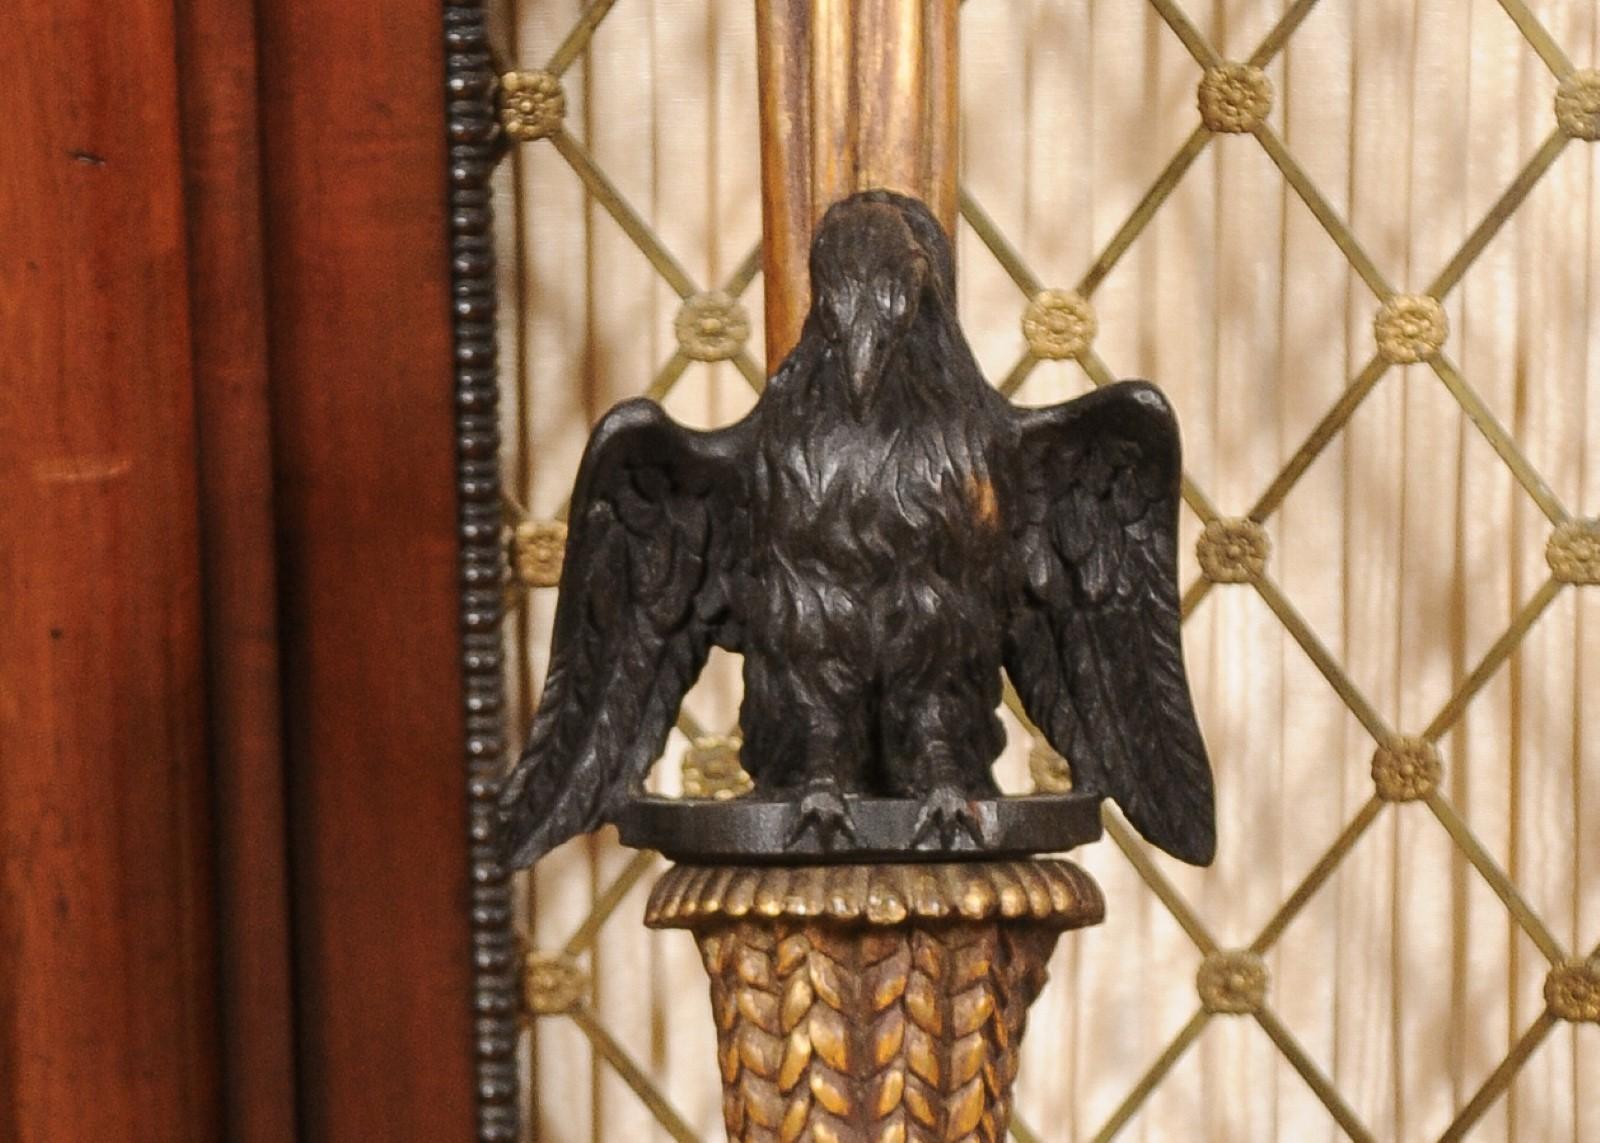  Pair of Giltwood Carved Eagle 2 Light Sconces with Tassle Detail, 20th Century For Sale 1